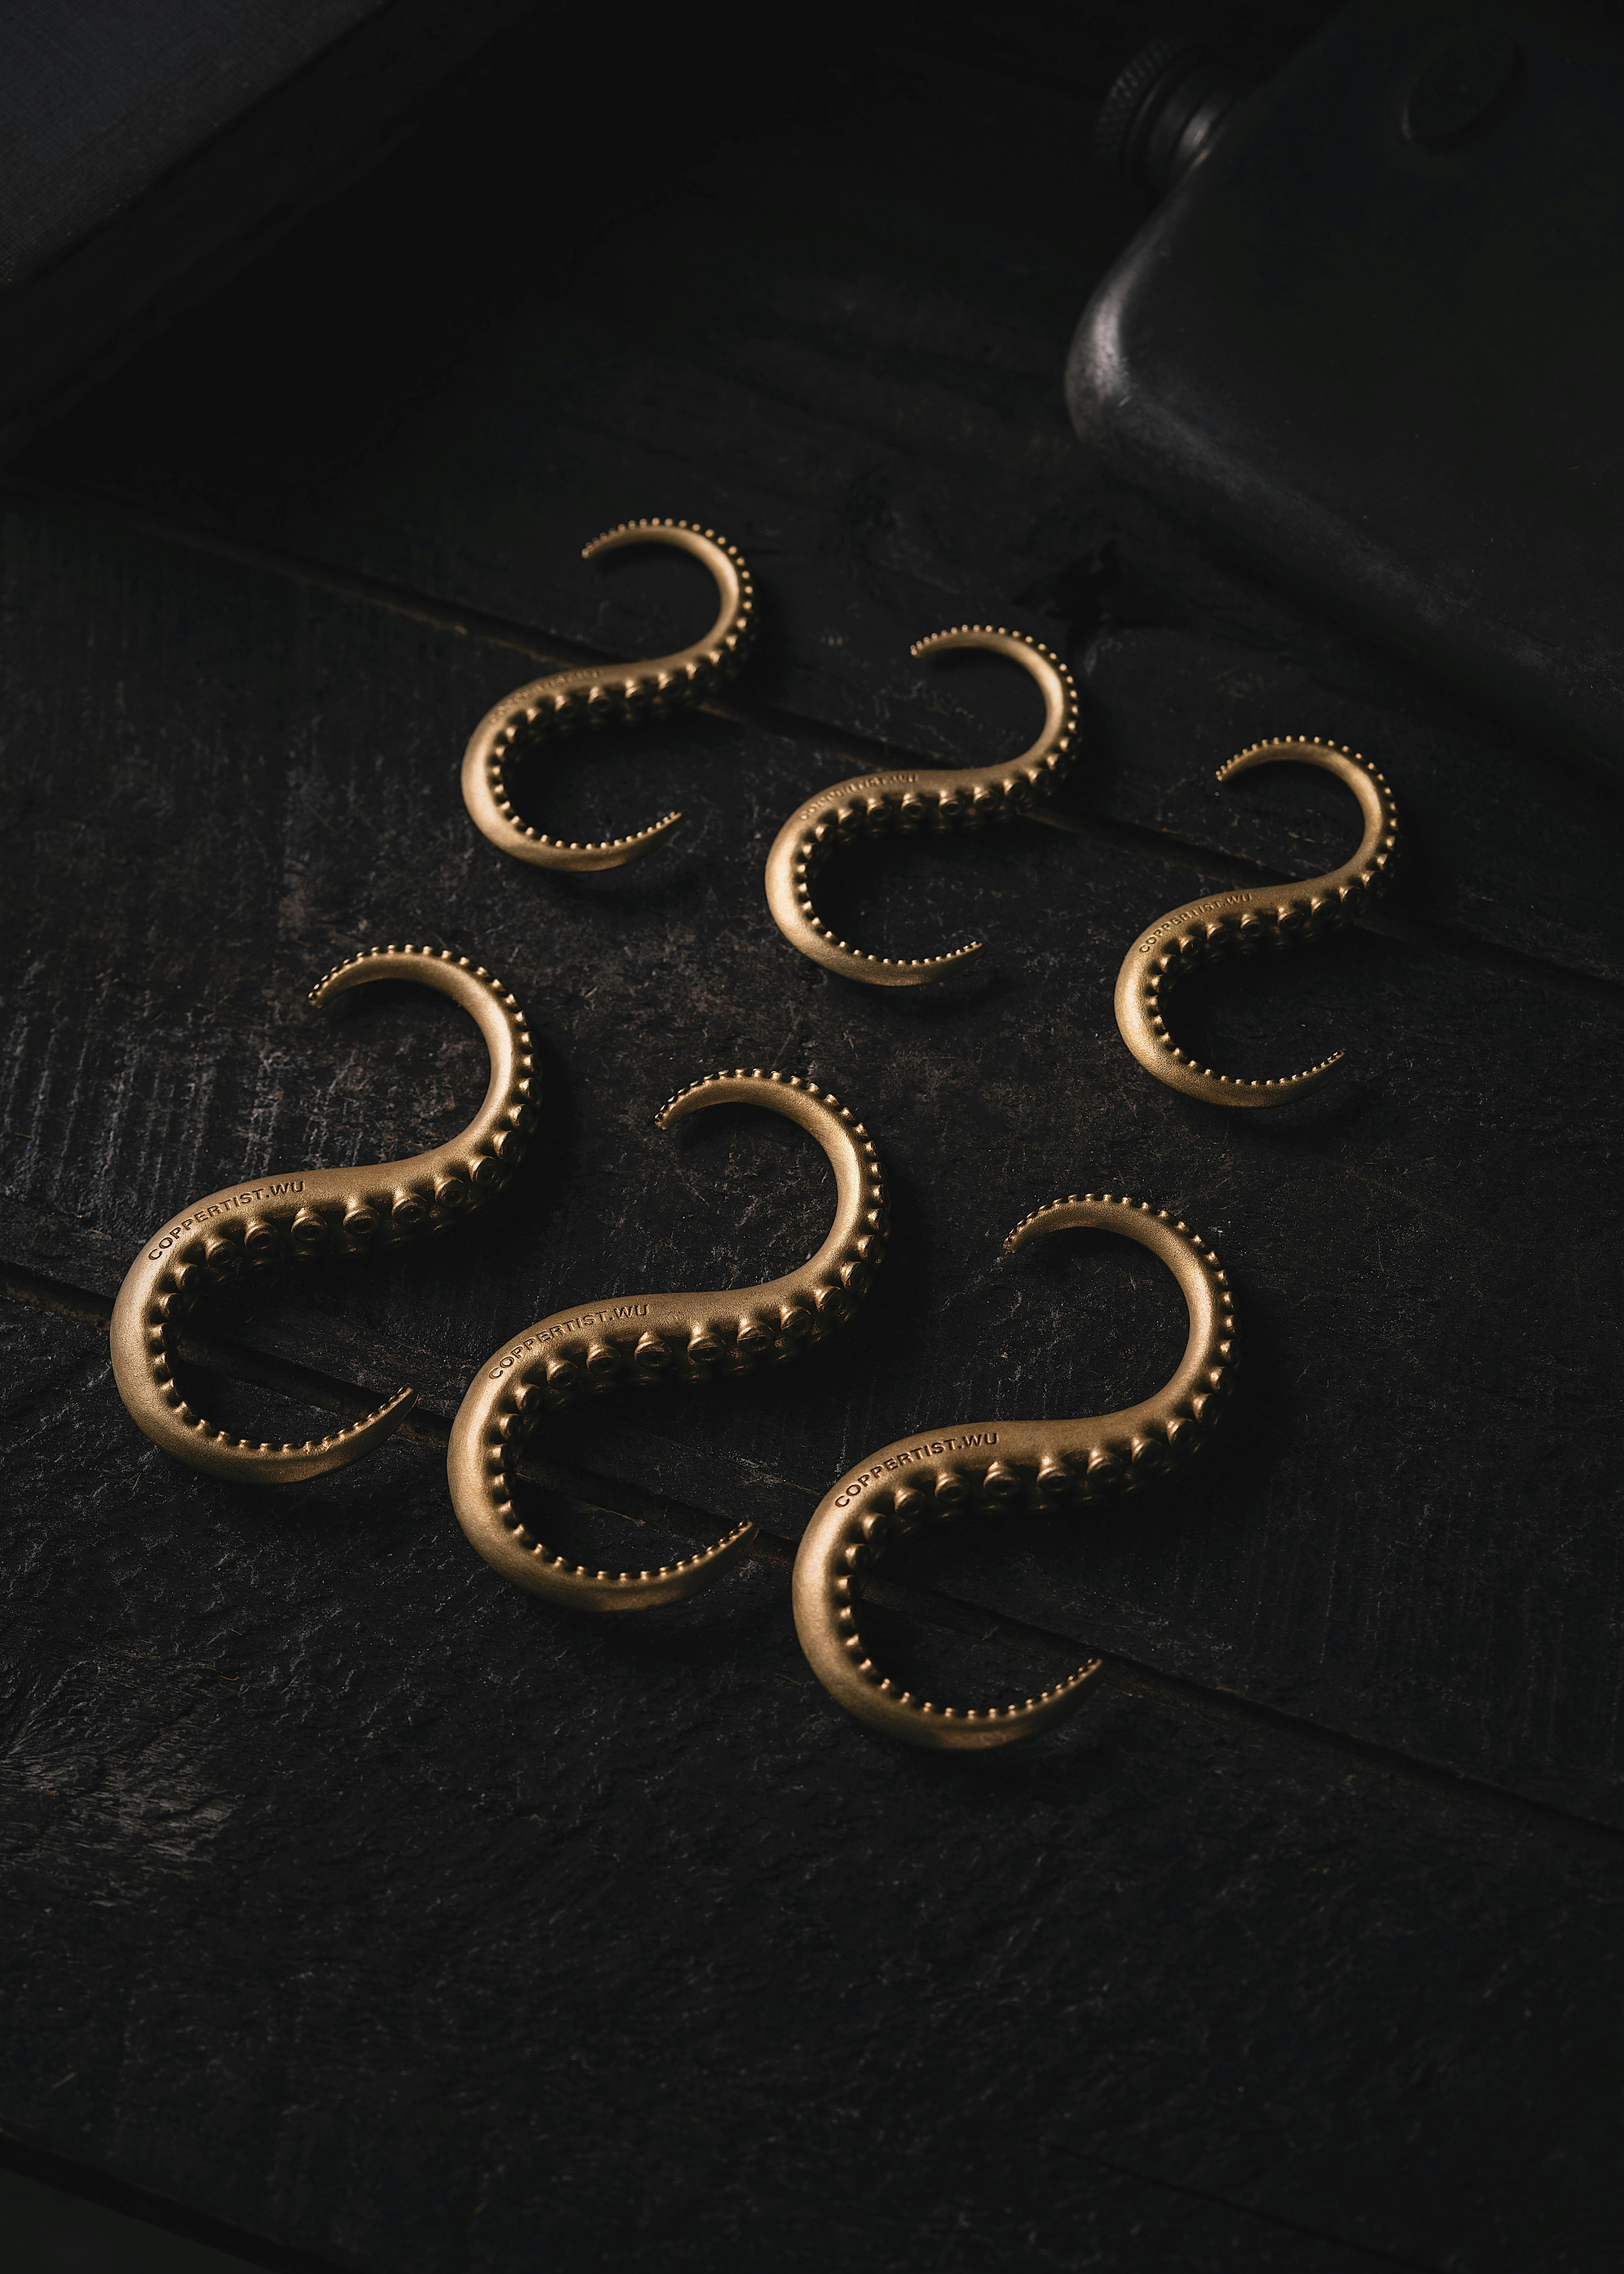 Close-up of Brass Octopus Tentacle Hooks on Black Background